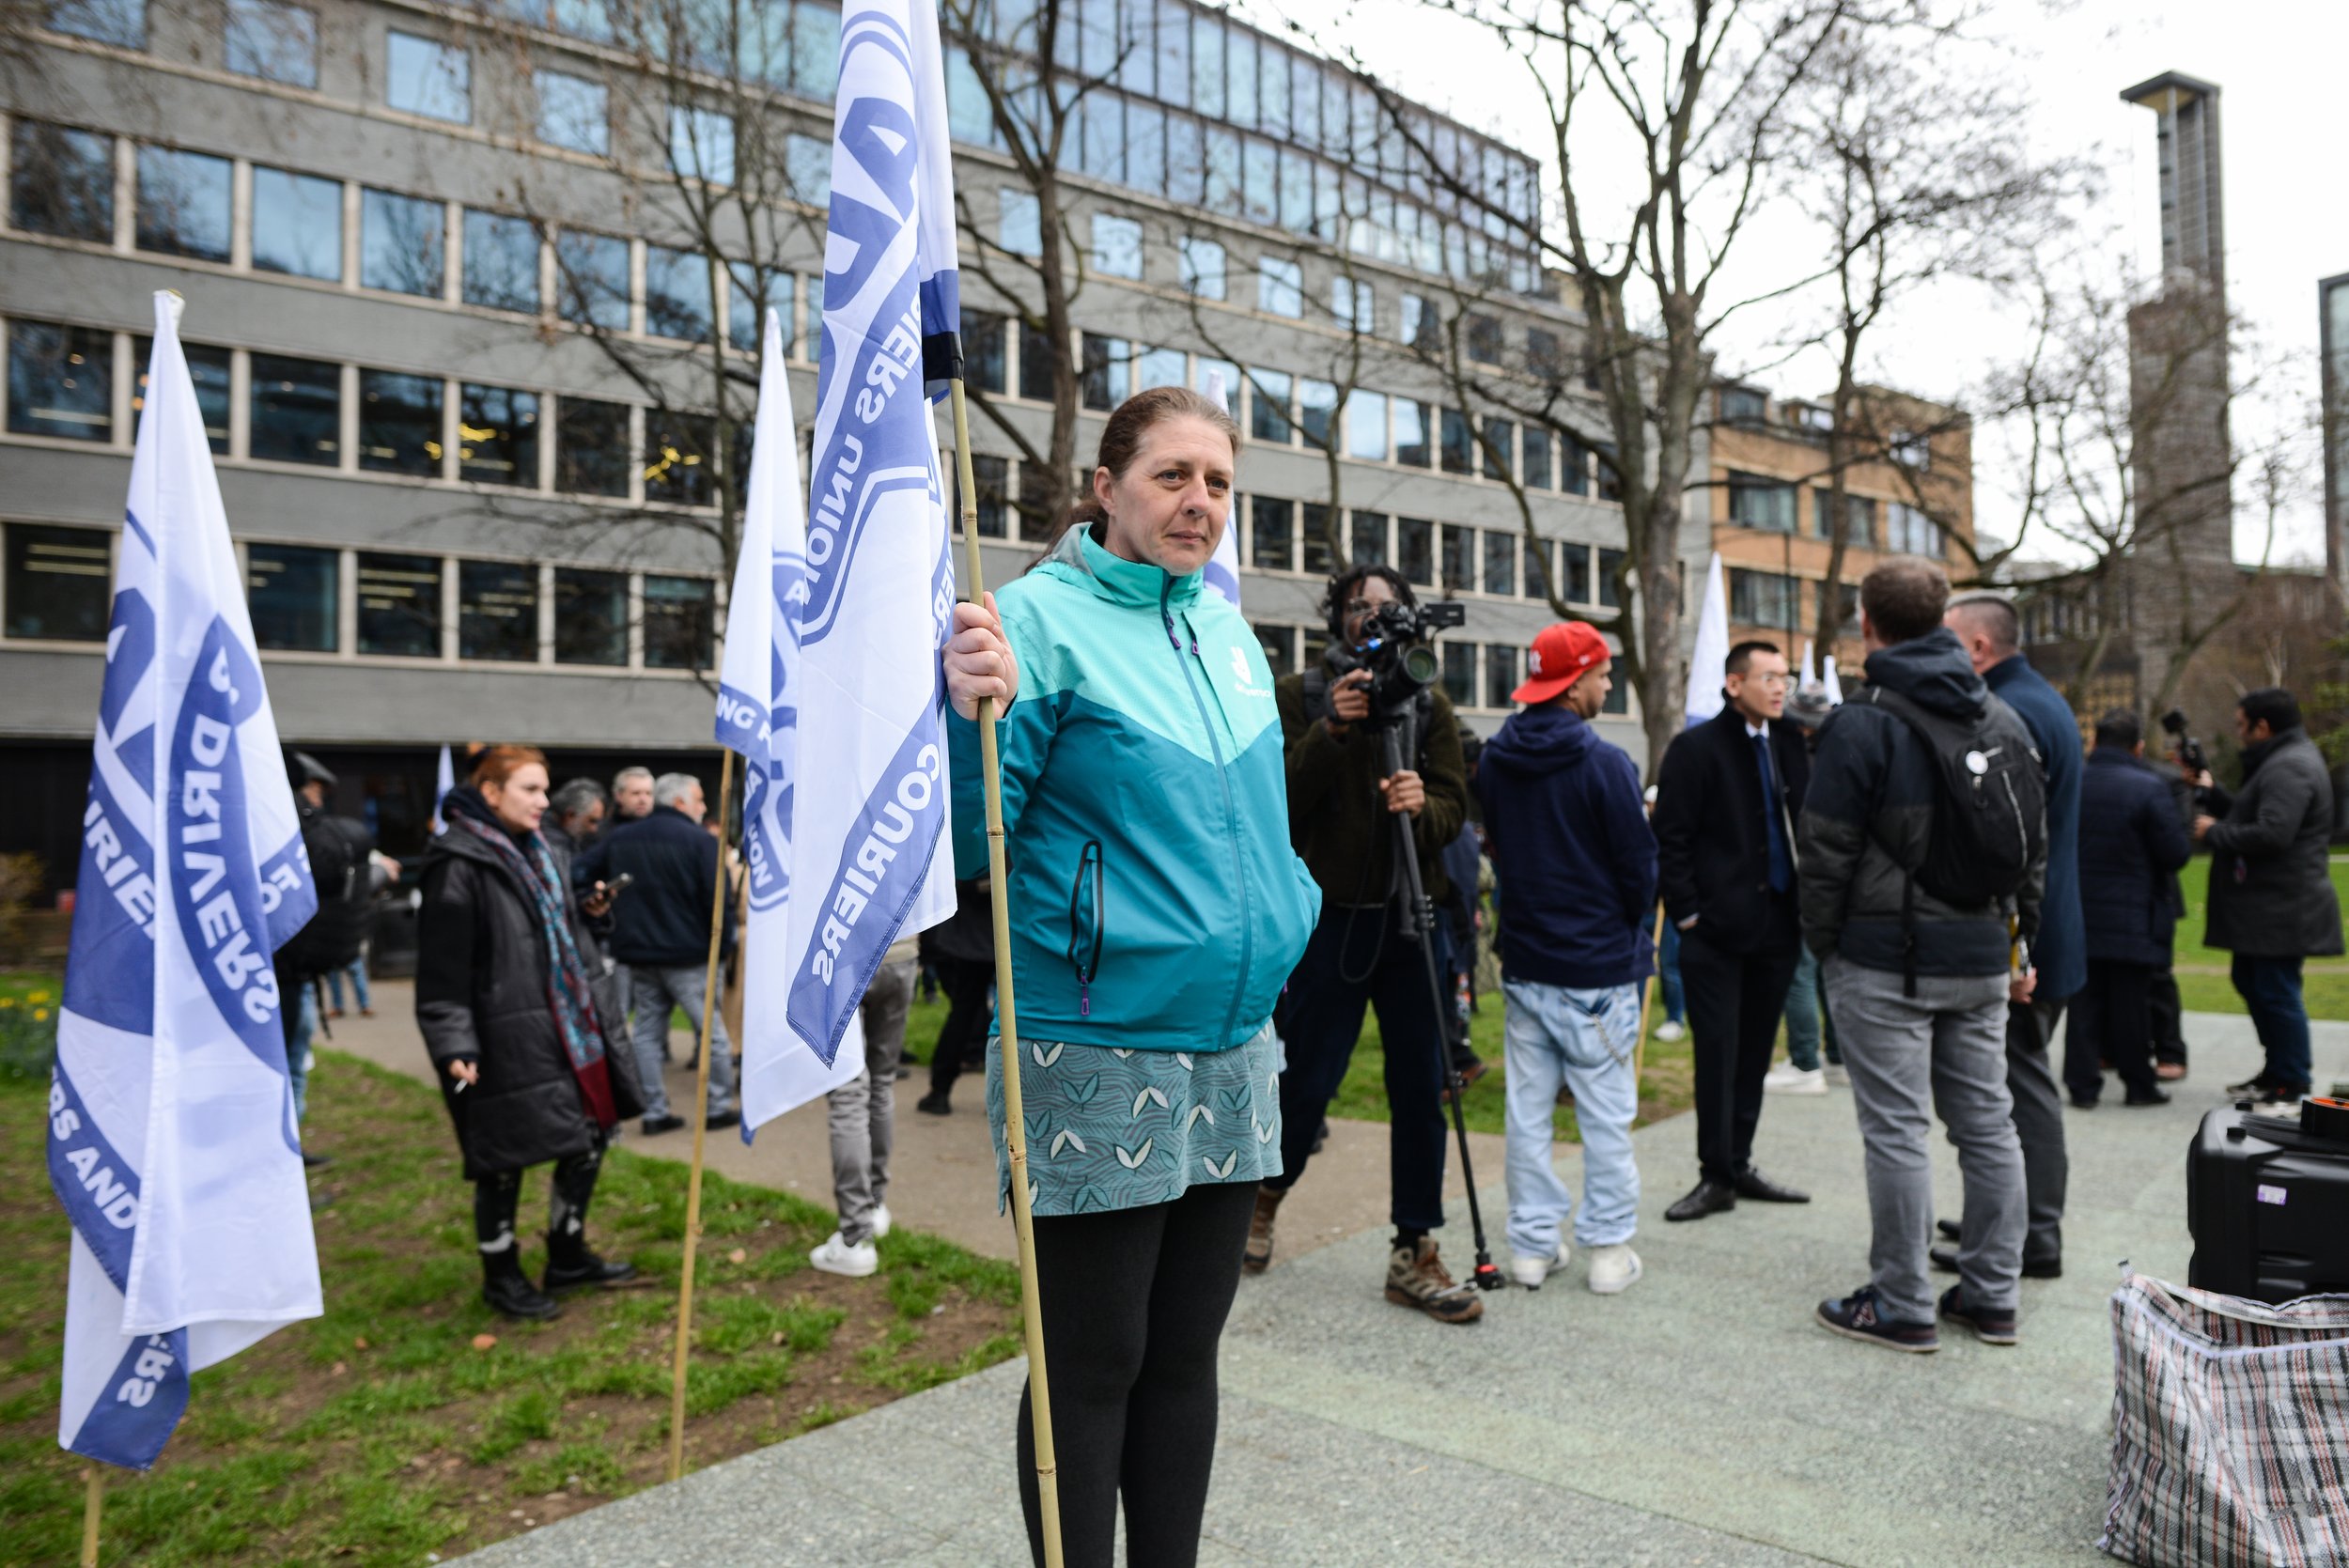  Cathy, a woman from Manchester, has travelled down with her children to support and show her solidarity during the demo in Whitechapel on March 3rd for Mohammed, a deliveroo driver that collapsed from illness whilst working 